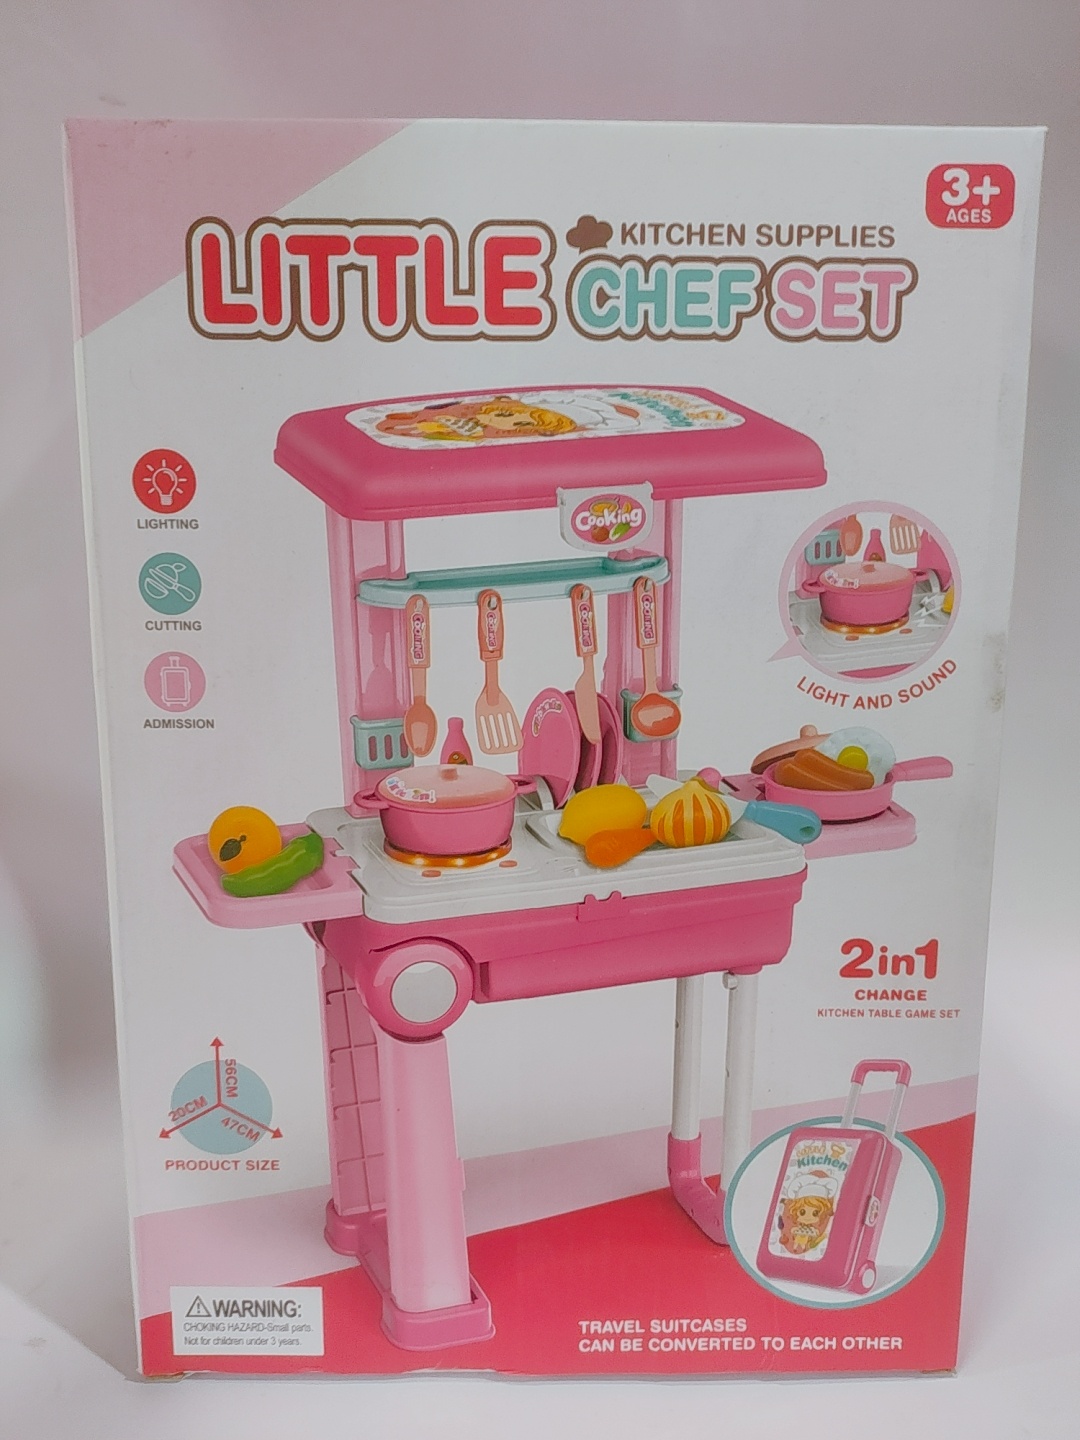 MEZIRE ®2 in 1 Little Chef Trolley Kitchen Play Toy Set For Kids, Kitchen Toy  Set (Pink) - ®2 in 1 Little Chef Trolley Kitchen Play Toy Set For  Kids